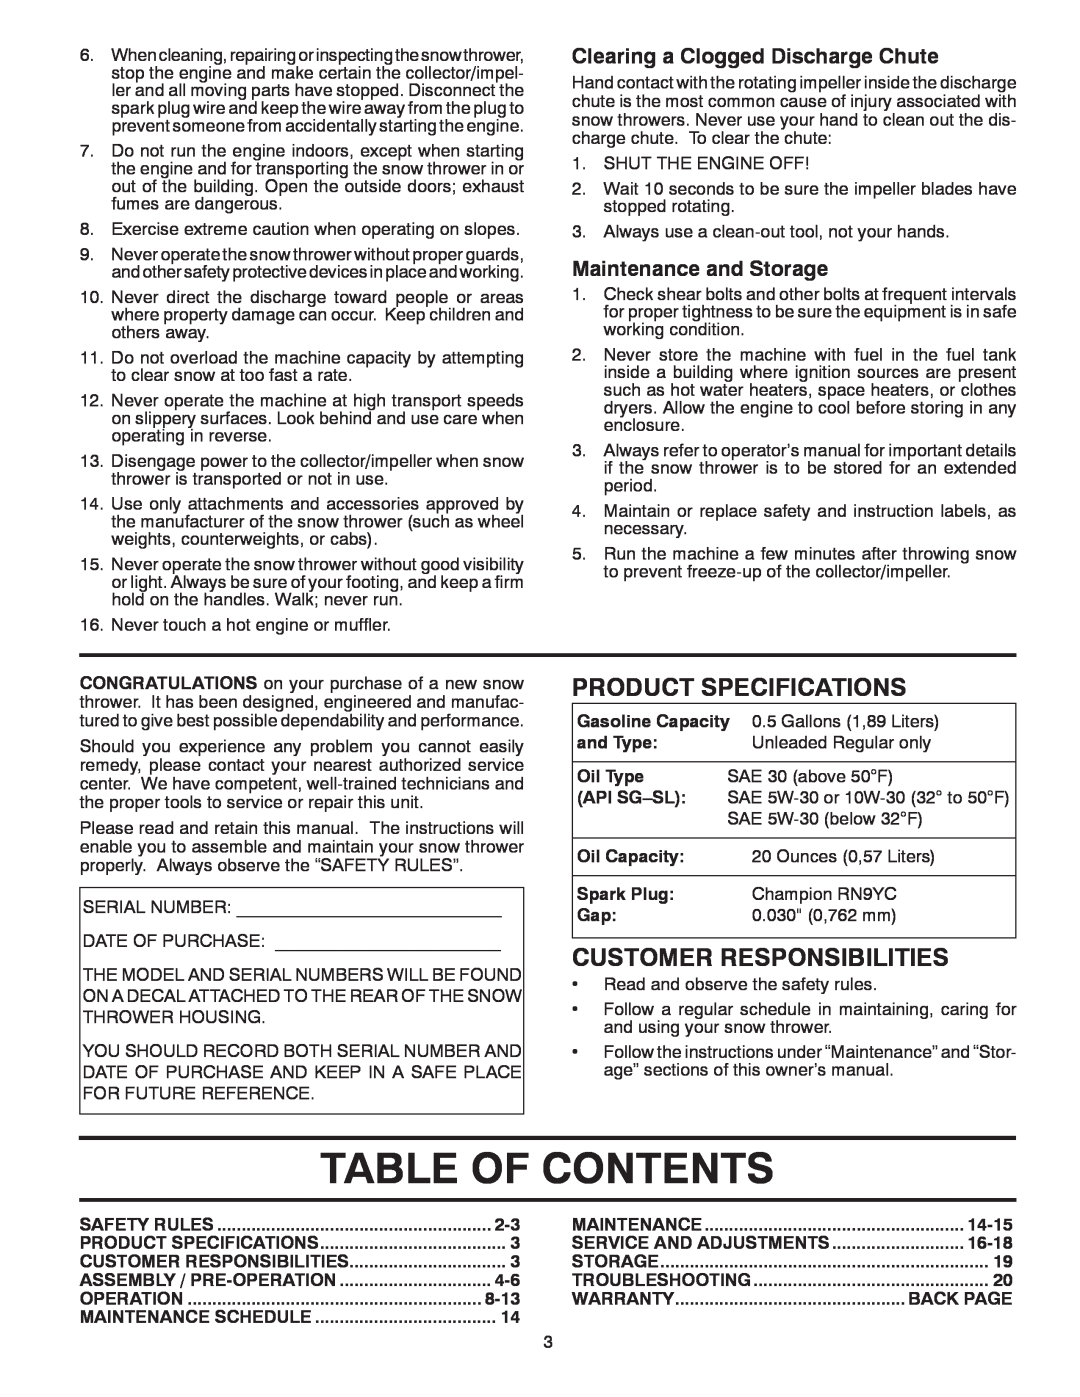 Husqvarna 96193005700 Table Of Contents, Clearing a Clogged Discharge Chute, Maintenance and Storage, Oil Type, Api Sg-Sl 